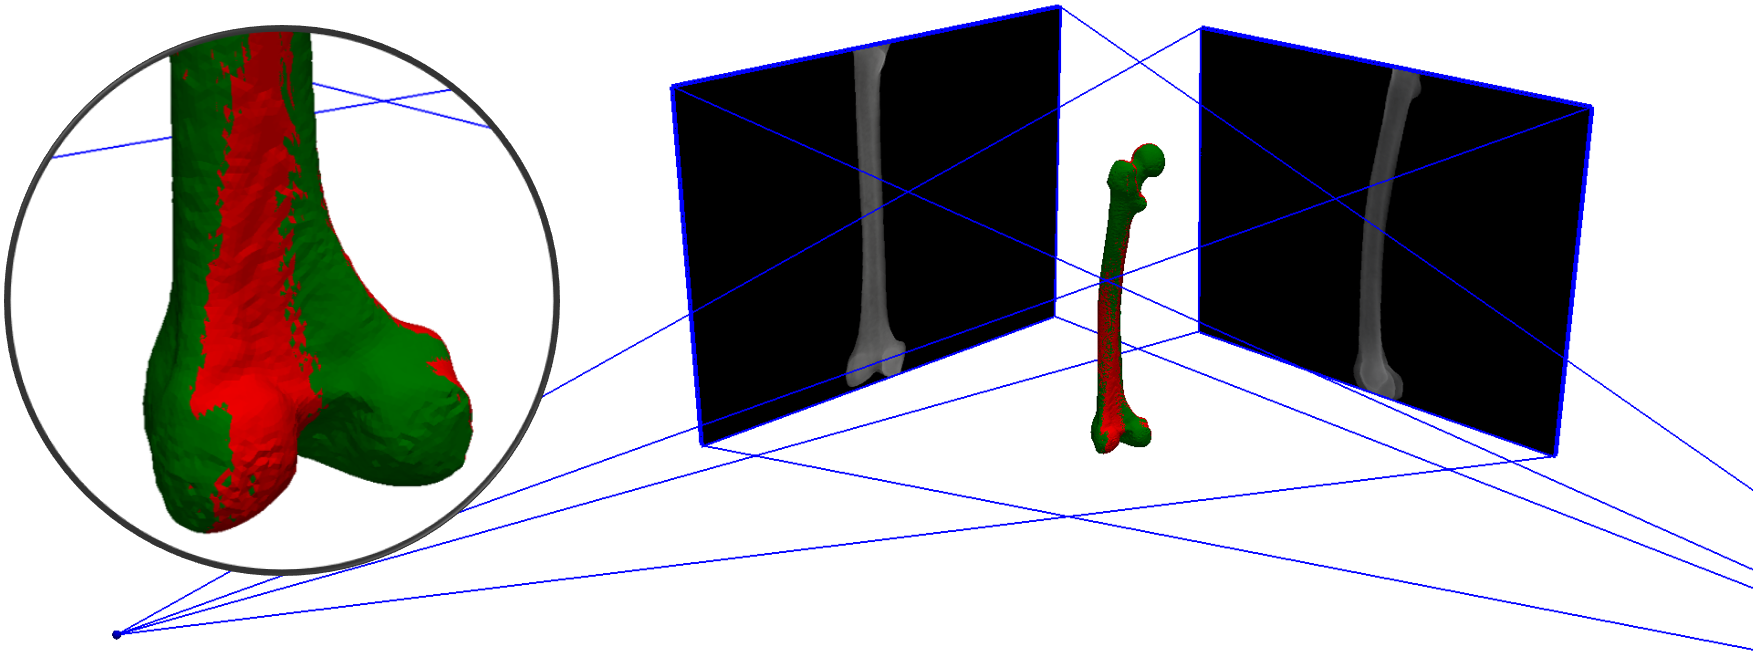 Virtual bi-planar fluoroscopy setup for an in-silico example of 2D-3D registration of a femur bone. Registration solution (red) almost perfectly matches the known target solution (green).